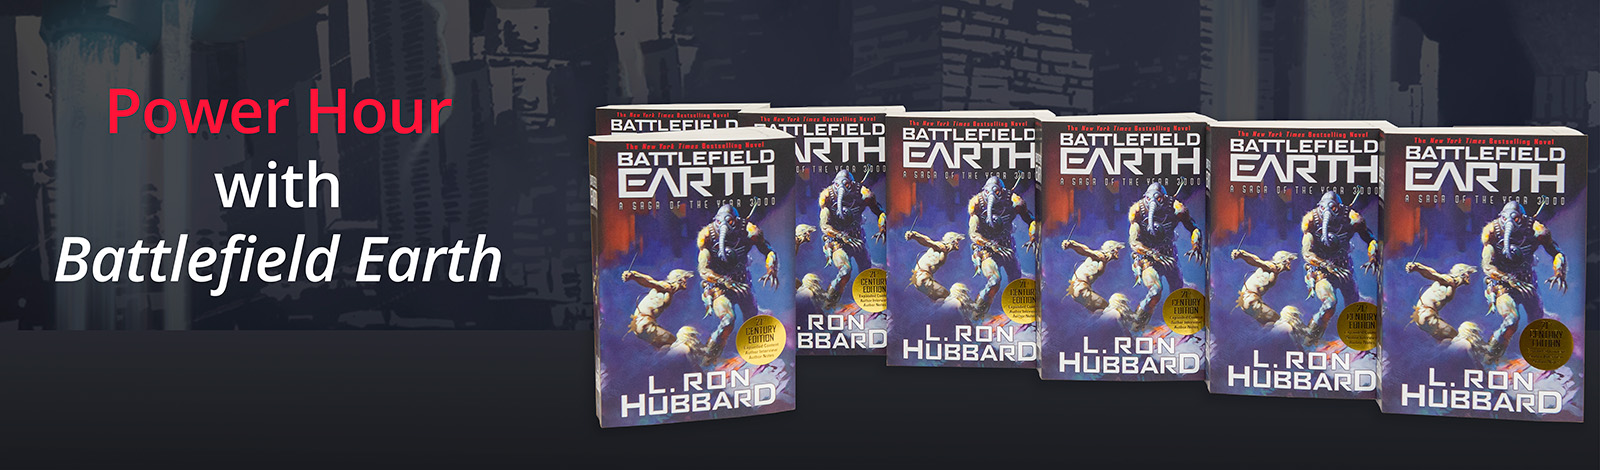 Power Hour with Battlefield Earth Banner